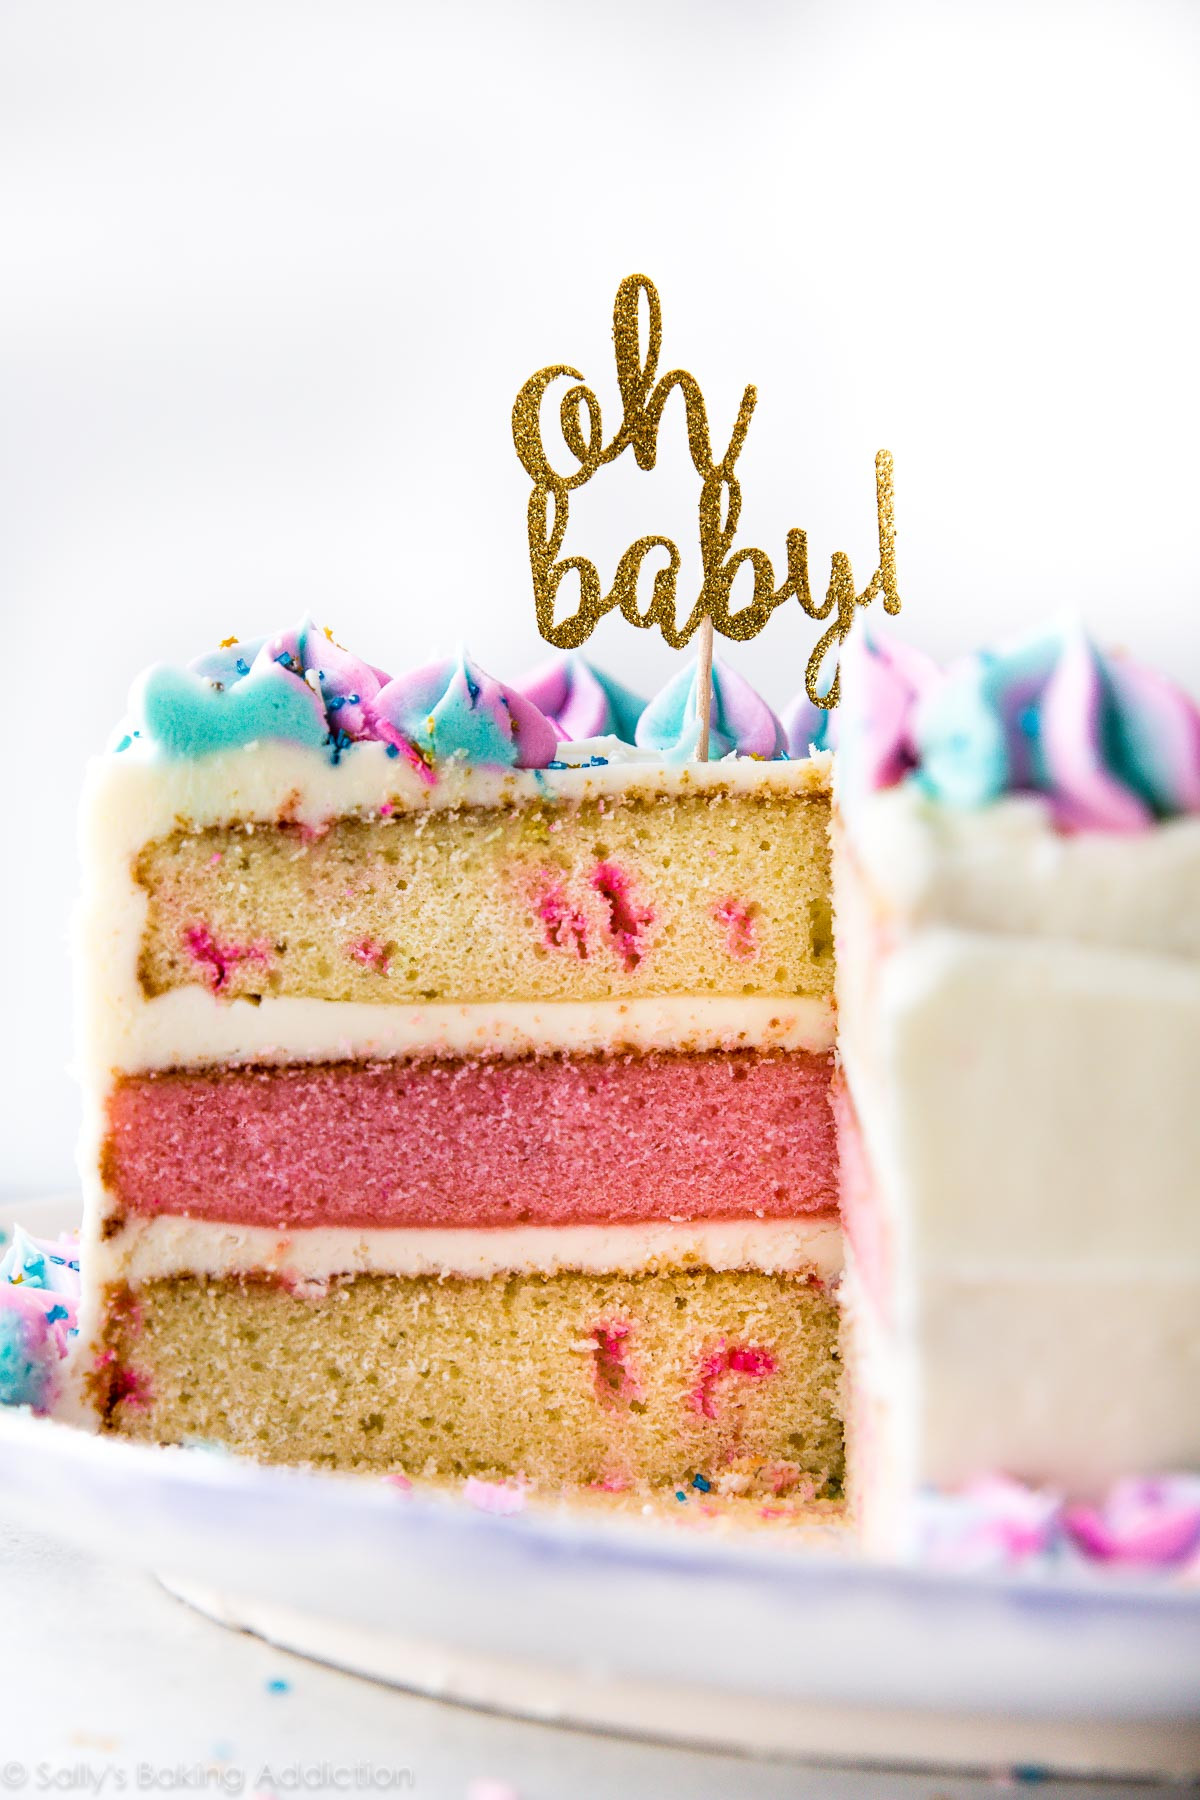 Baby Reveal Party Cakes
 Gender Reveal Cake